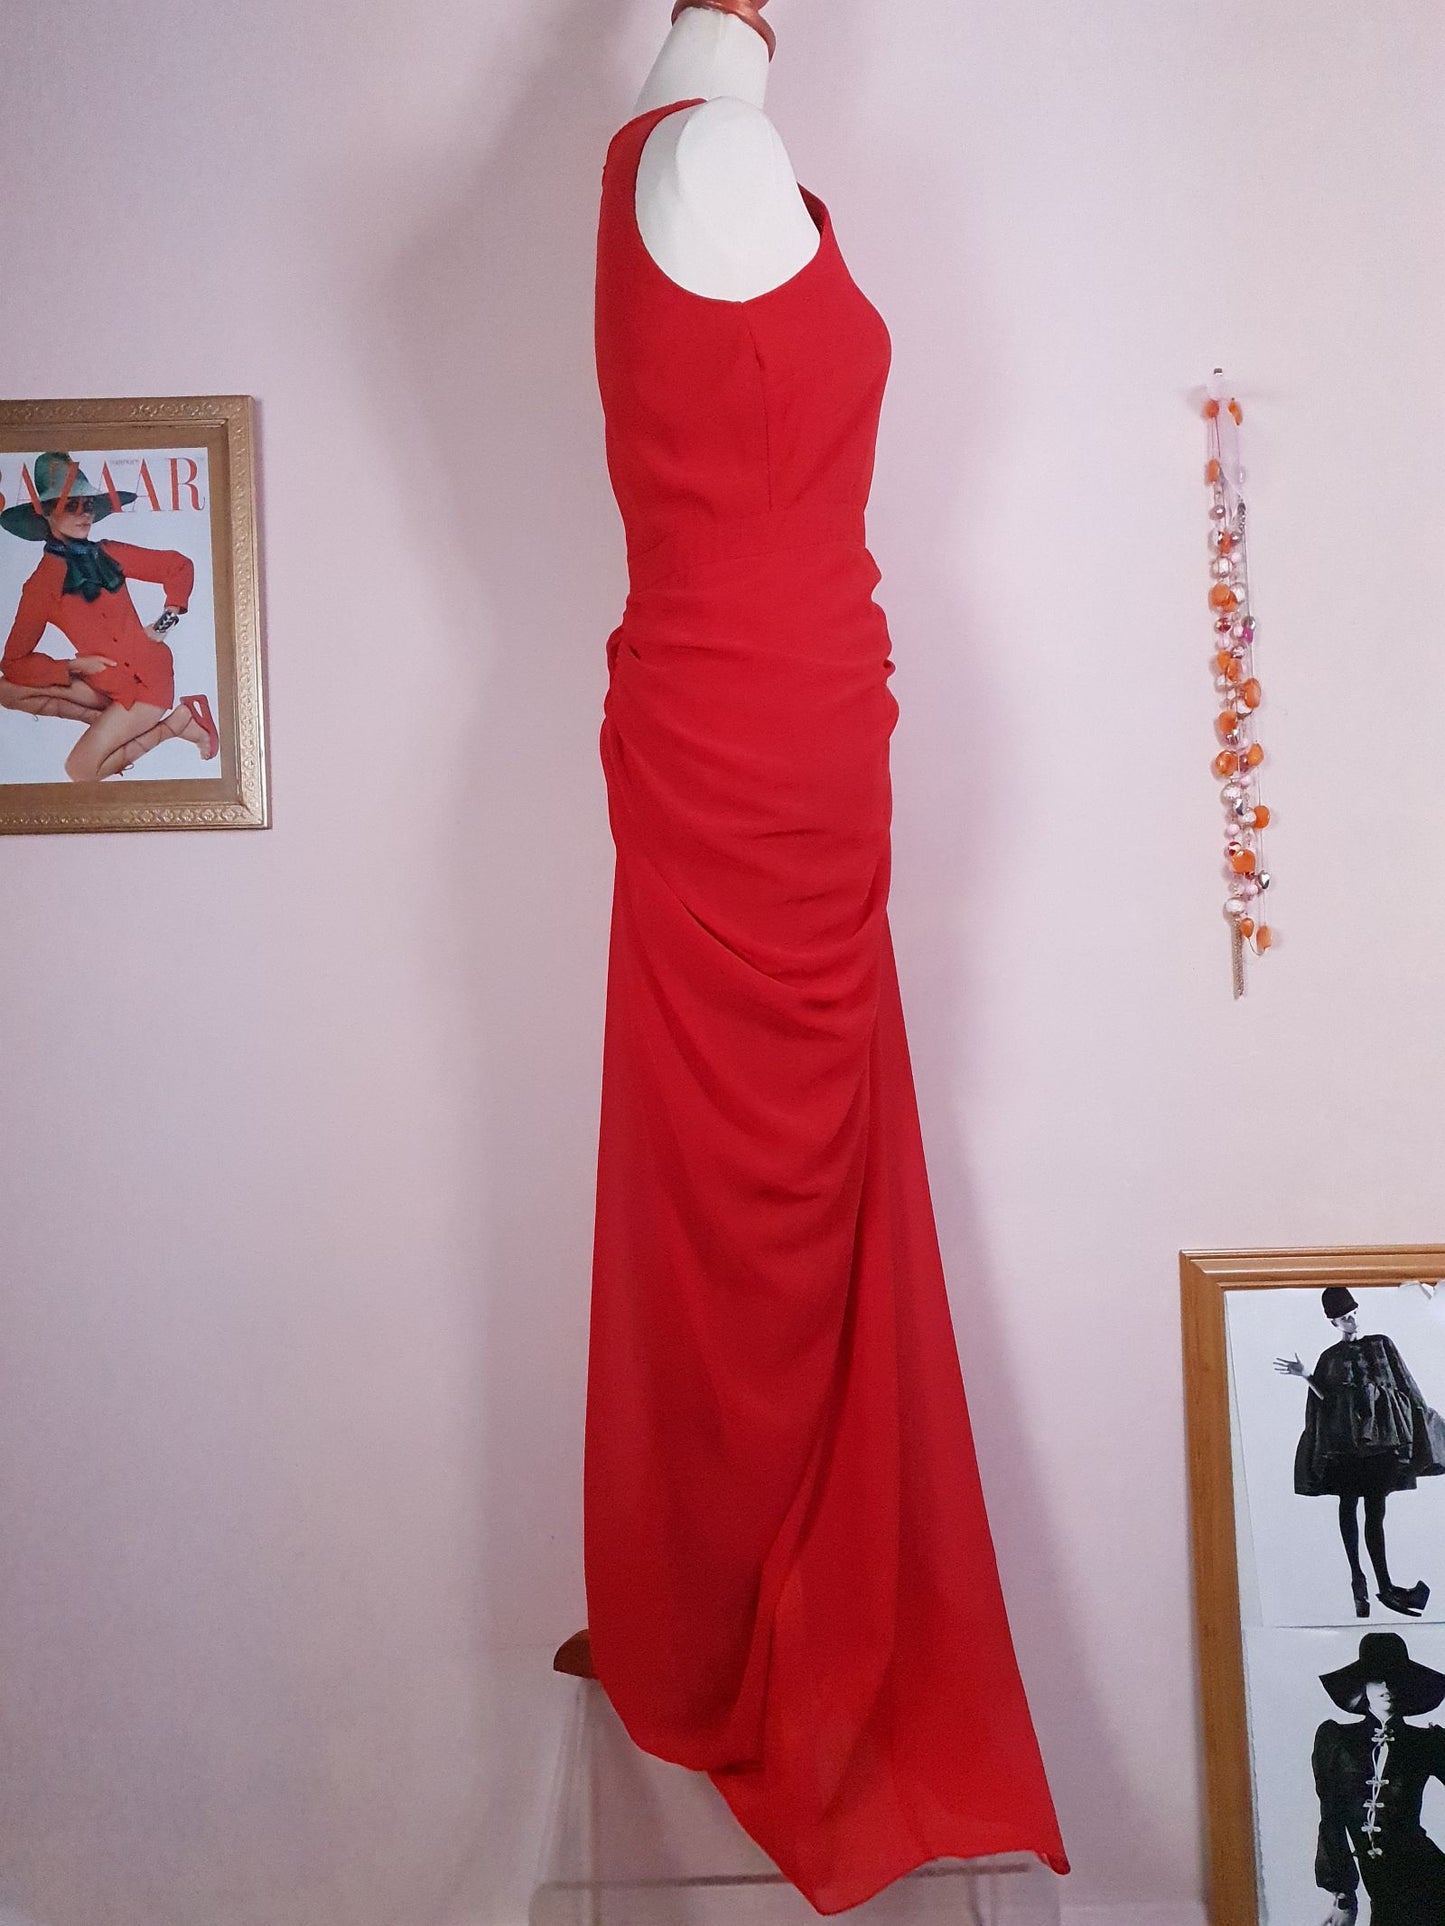 Glamorous 1990s Red Chiffon Evening Gown Dress - Size 8/10